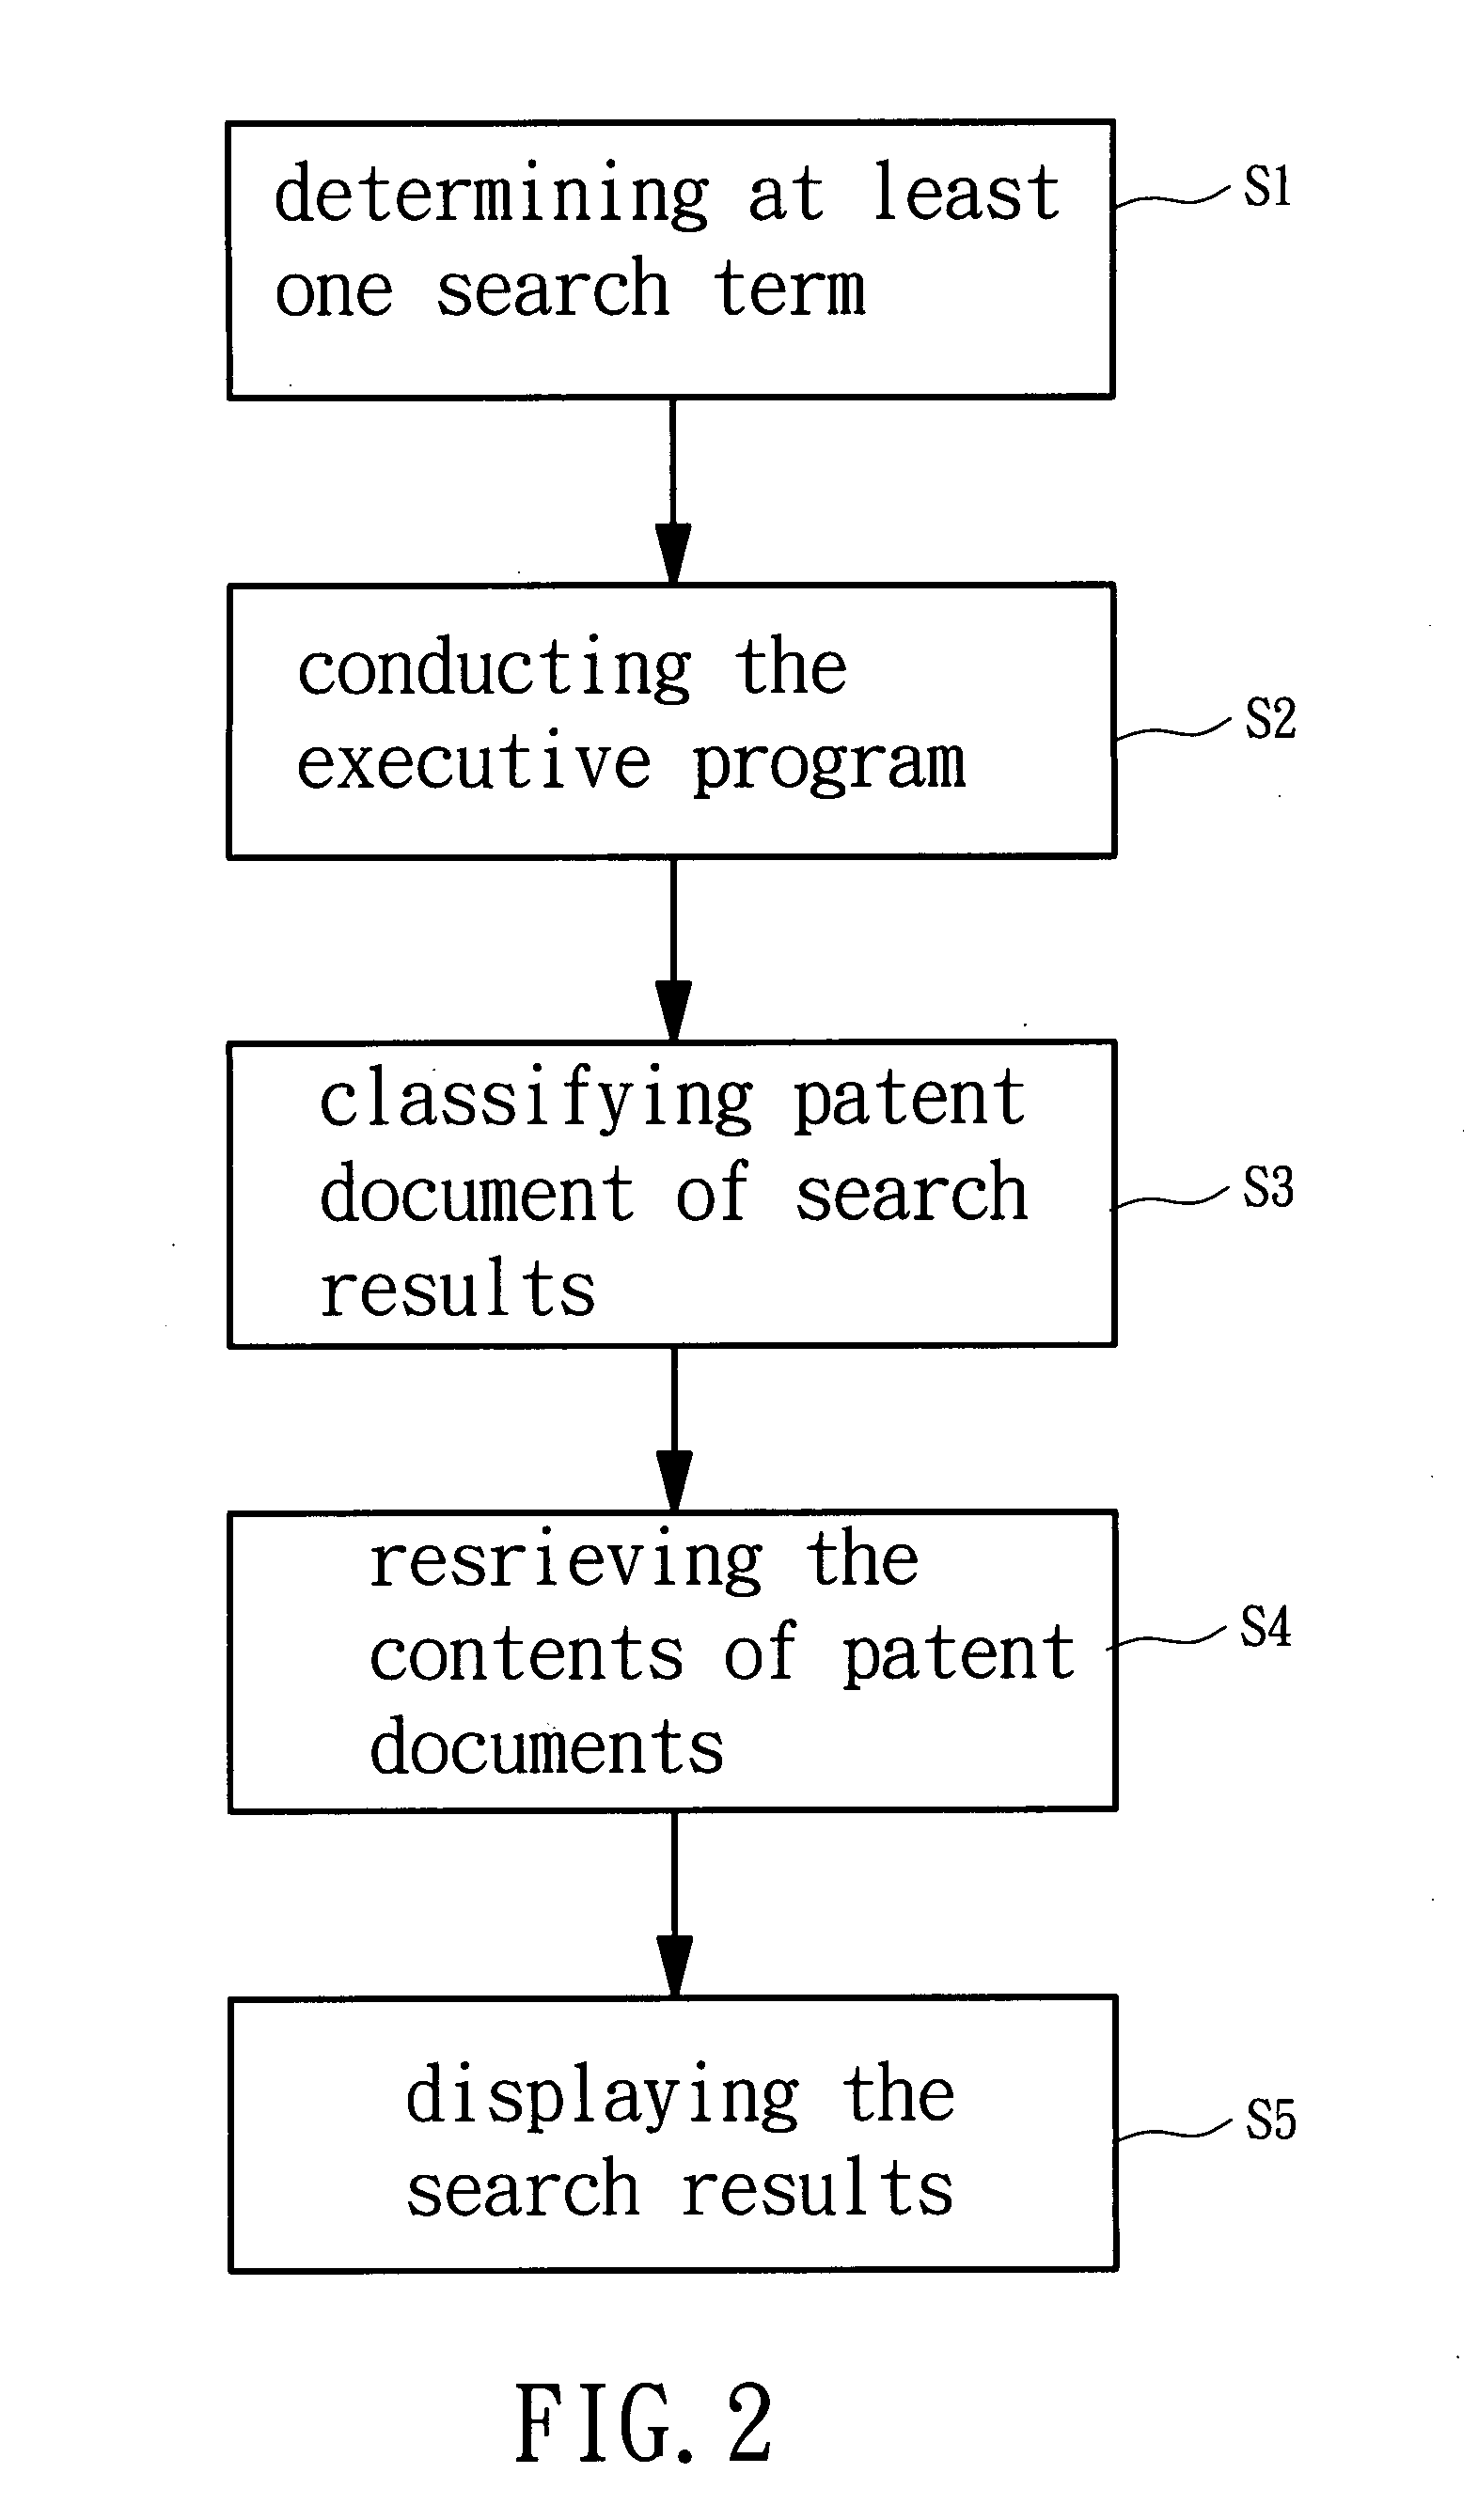 Display method for patent search